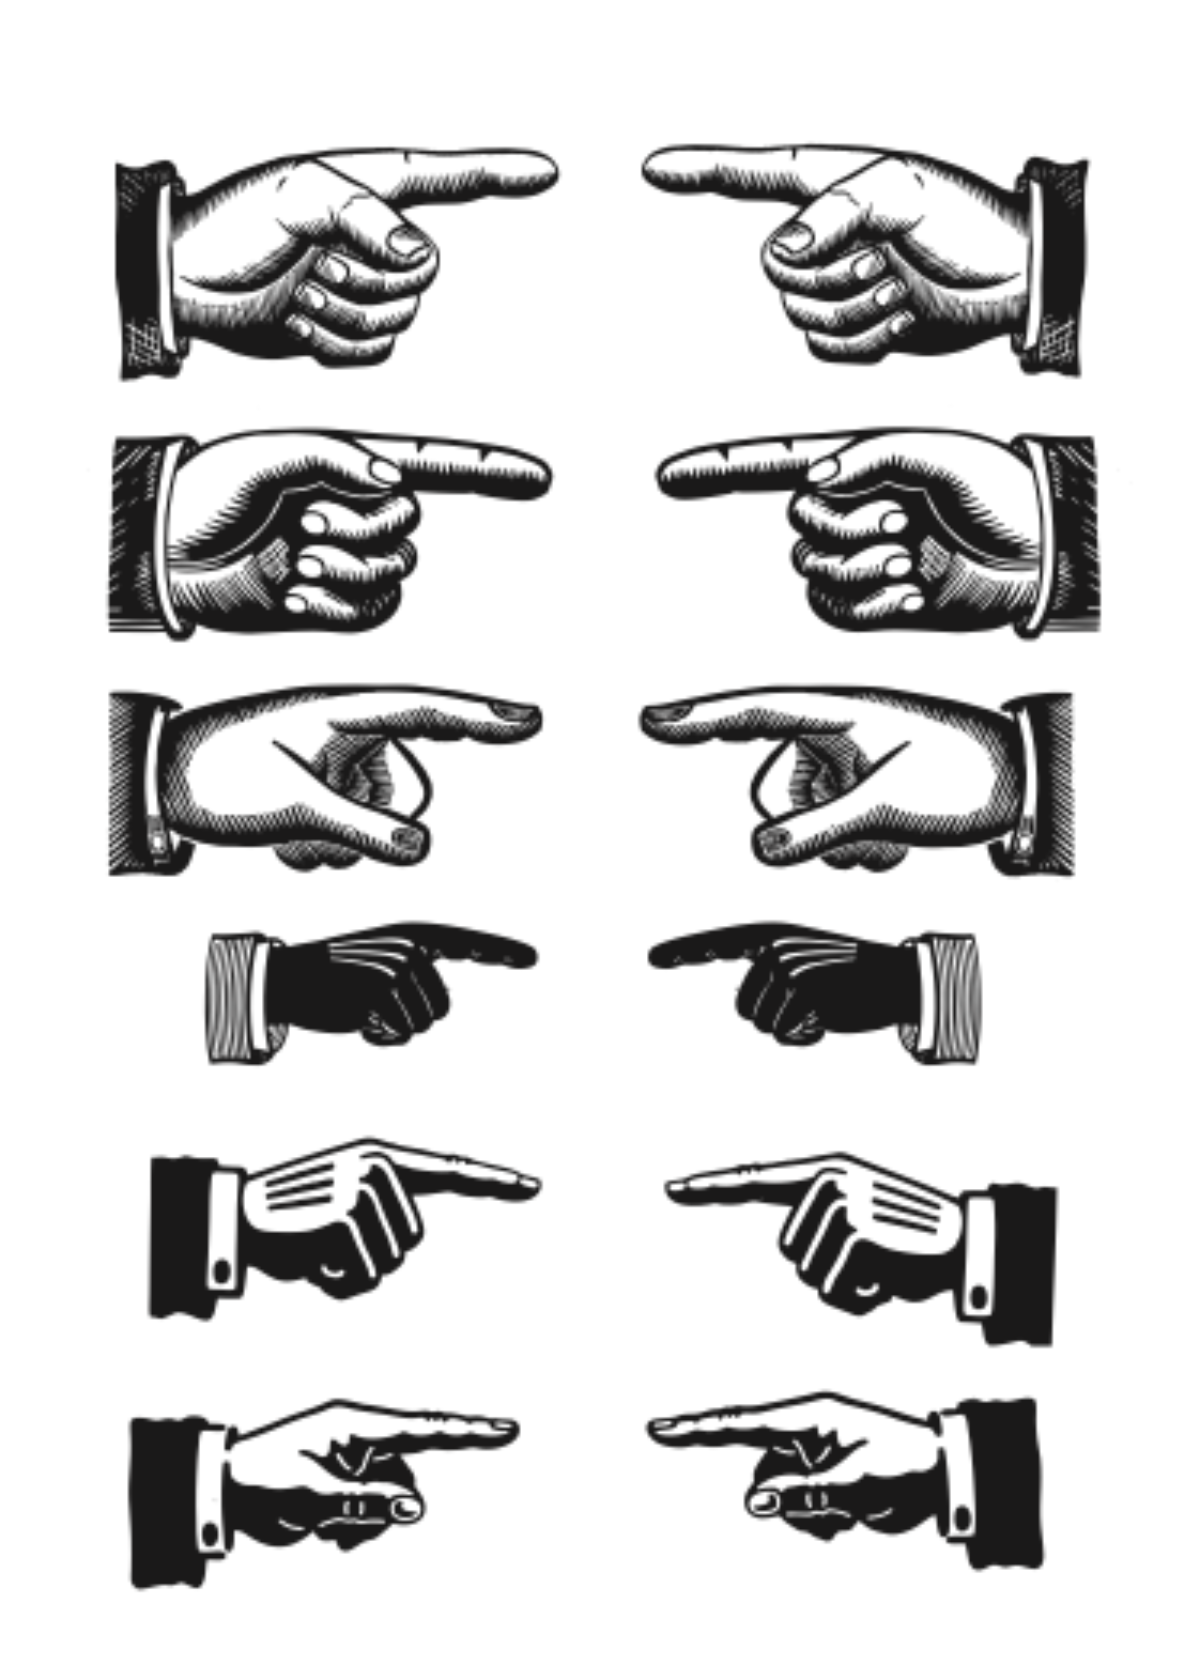 6.-pointing_hands_vectors_by_bozoartist-d3km1jf